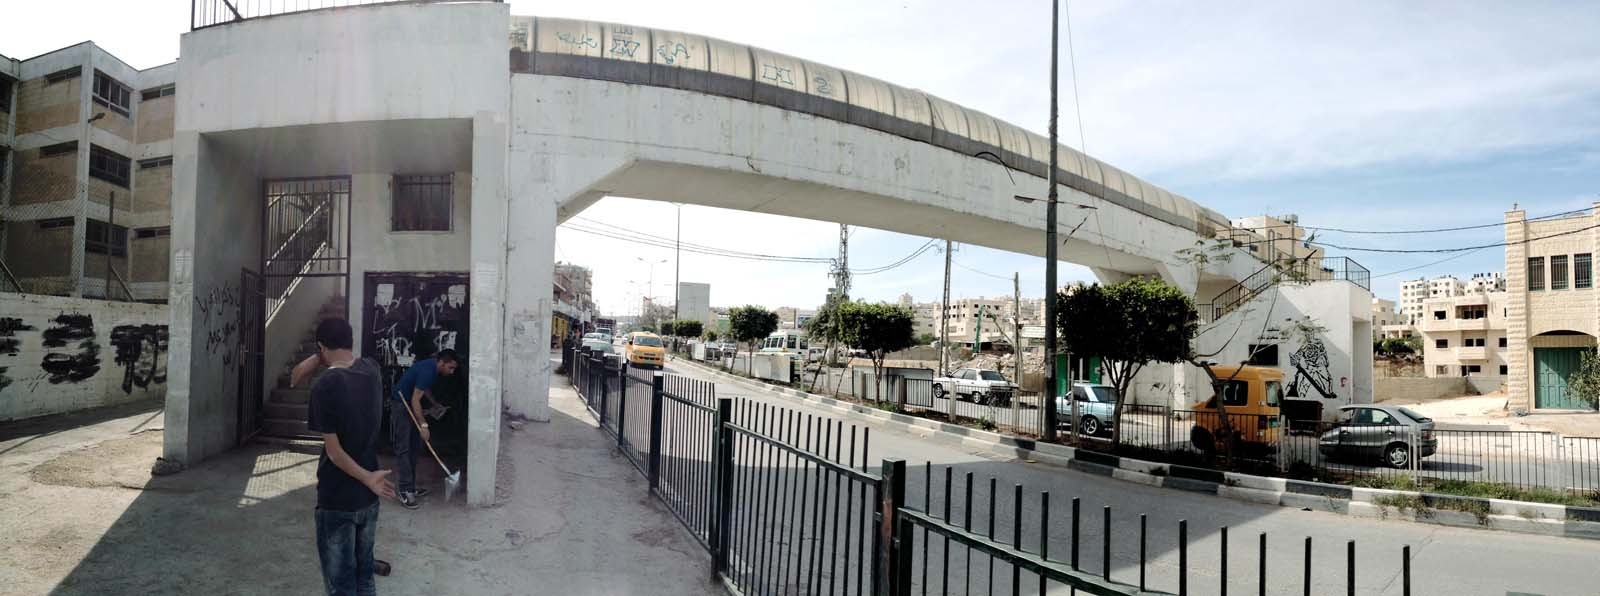 The pedestrian footbridge connecting the city of&nbsp;Deishah to the camp: build by people in the city to allow their children to attend the UNRWA school in the camp. It has since been closed. (Photo courtesy Campus in Camps)